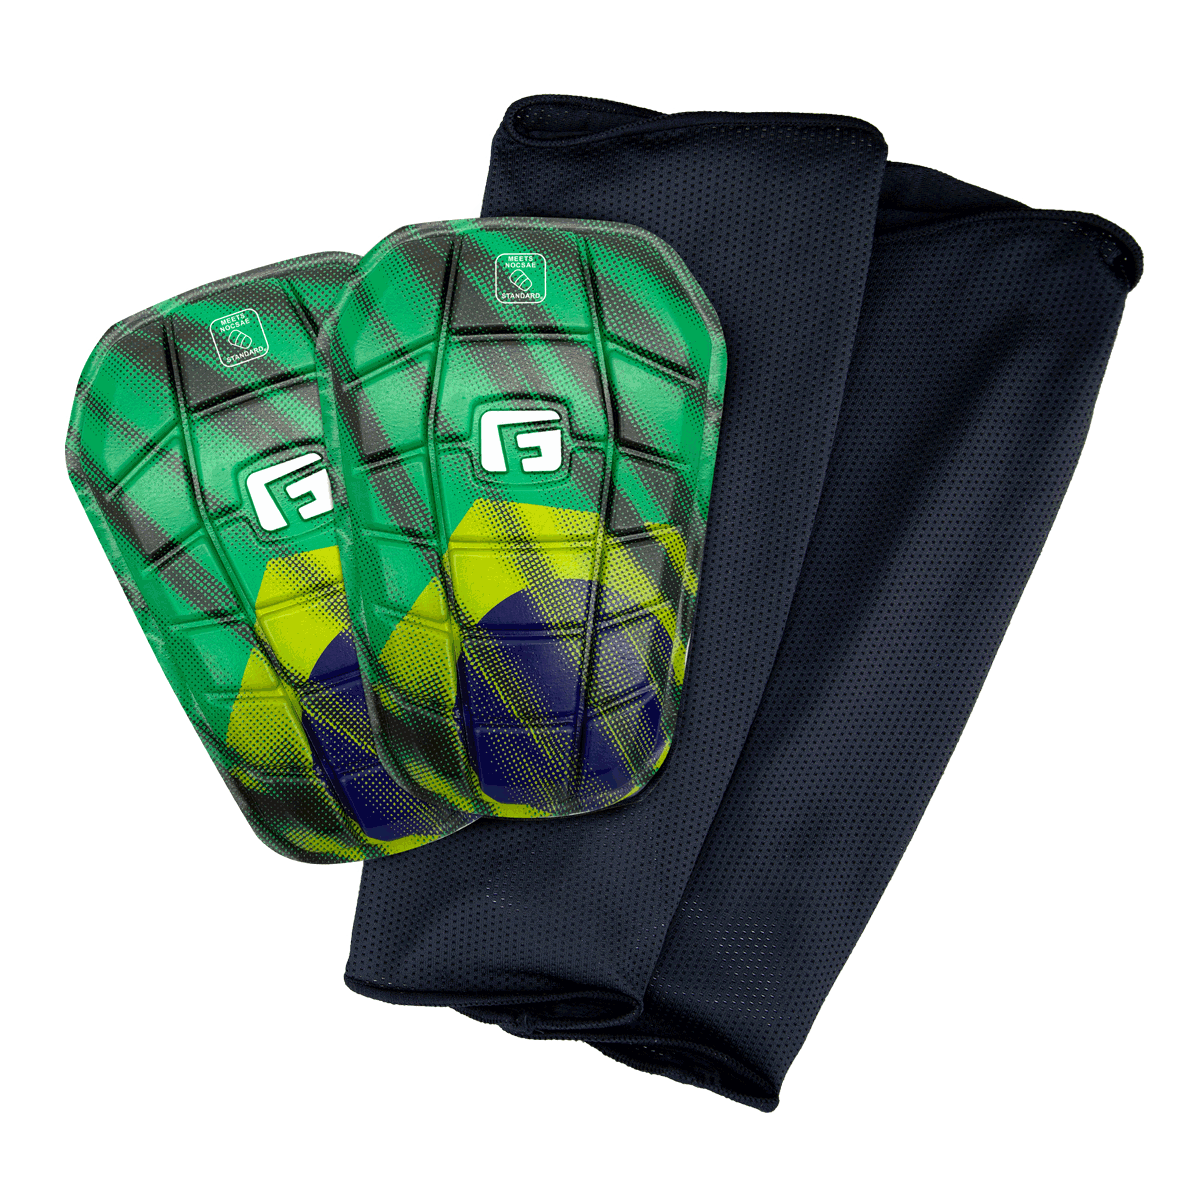 Soccer Blade NOCSAE Shin Guards Slip in light weight flexible stay in place no sleeve soccer